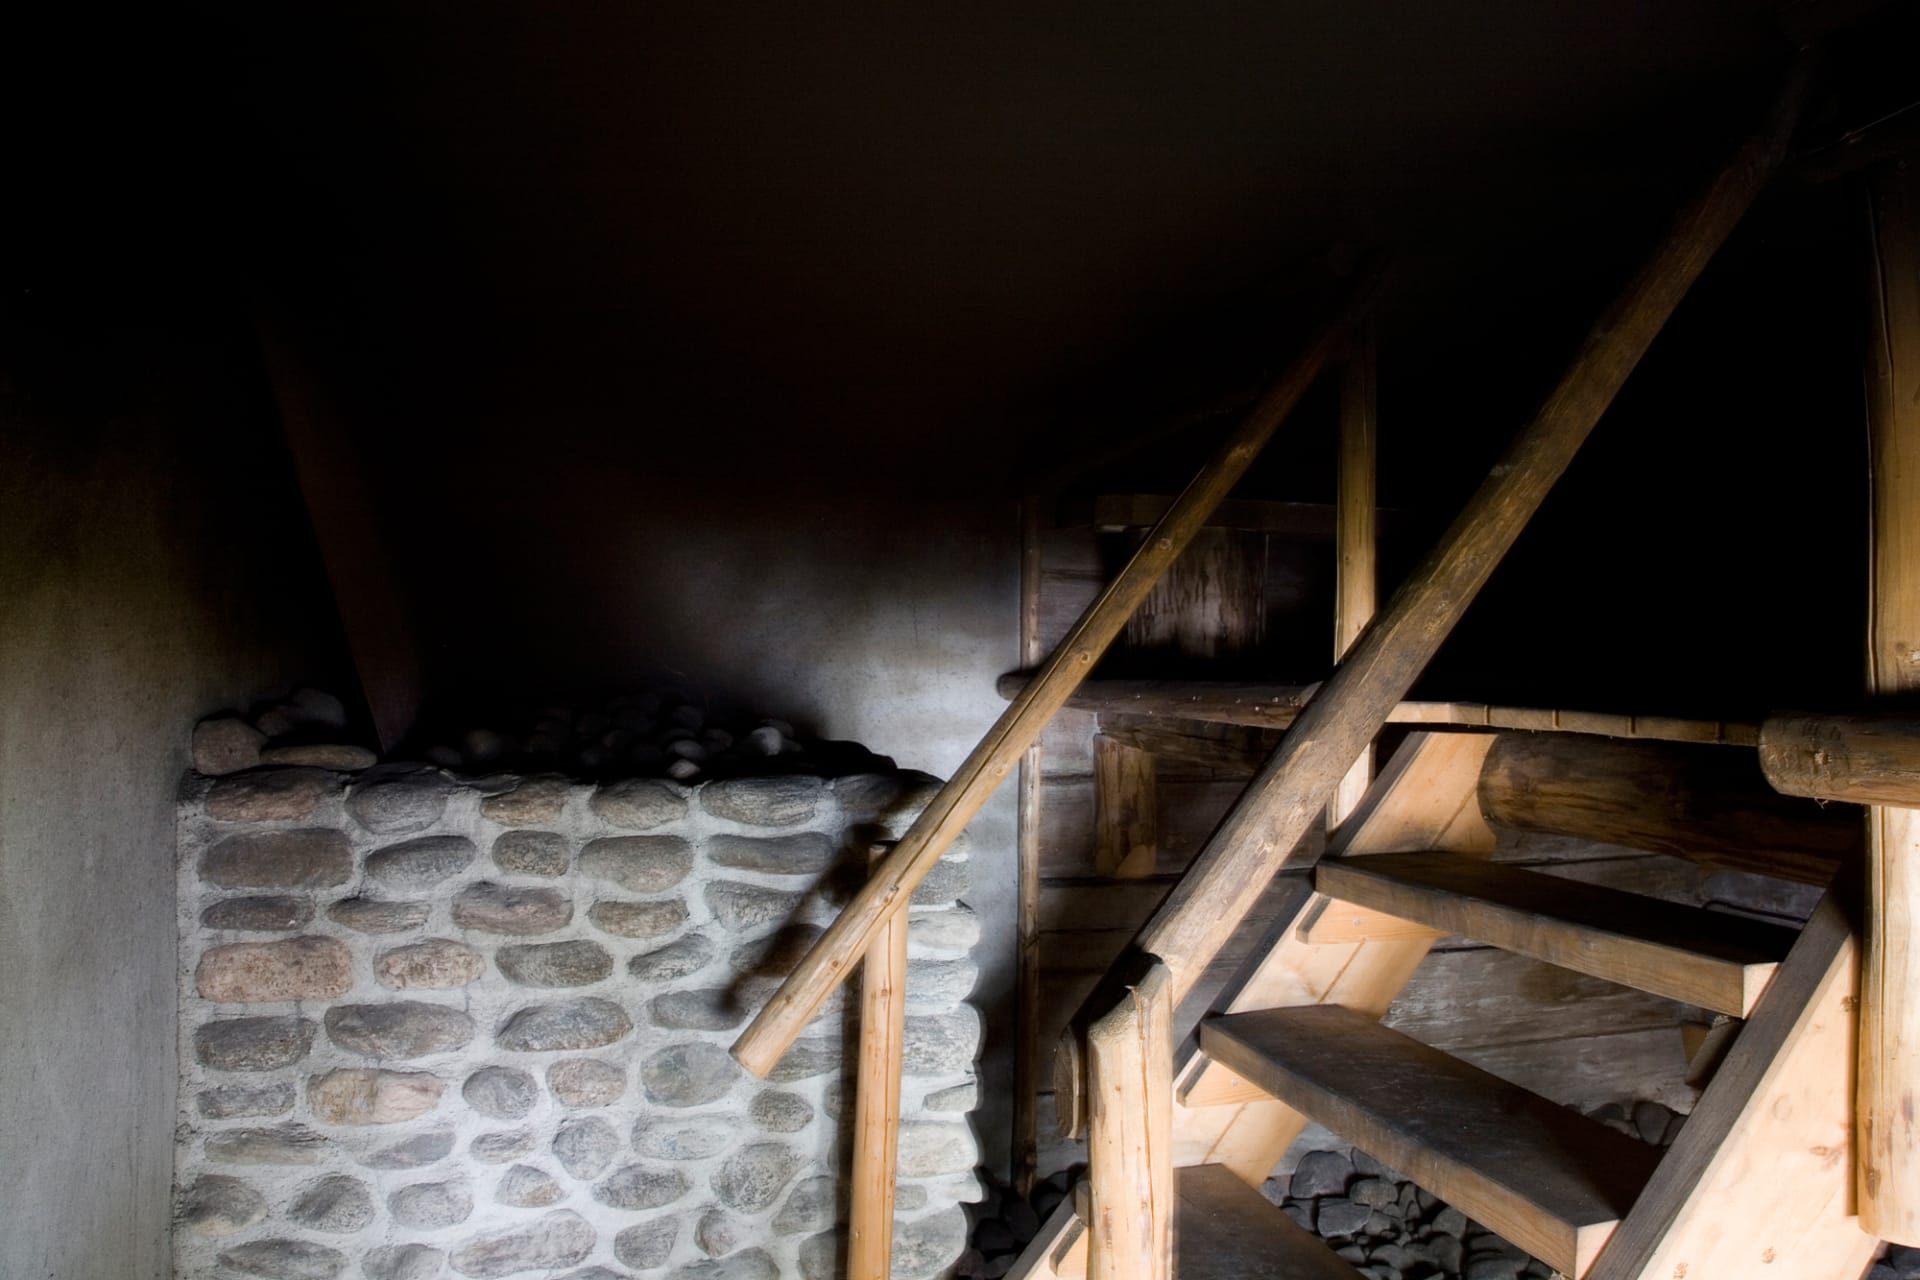 In sauna there is only a small window and the walls and the ceiling are covered in smoke from above the stove.